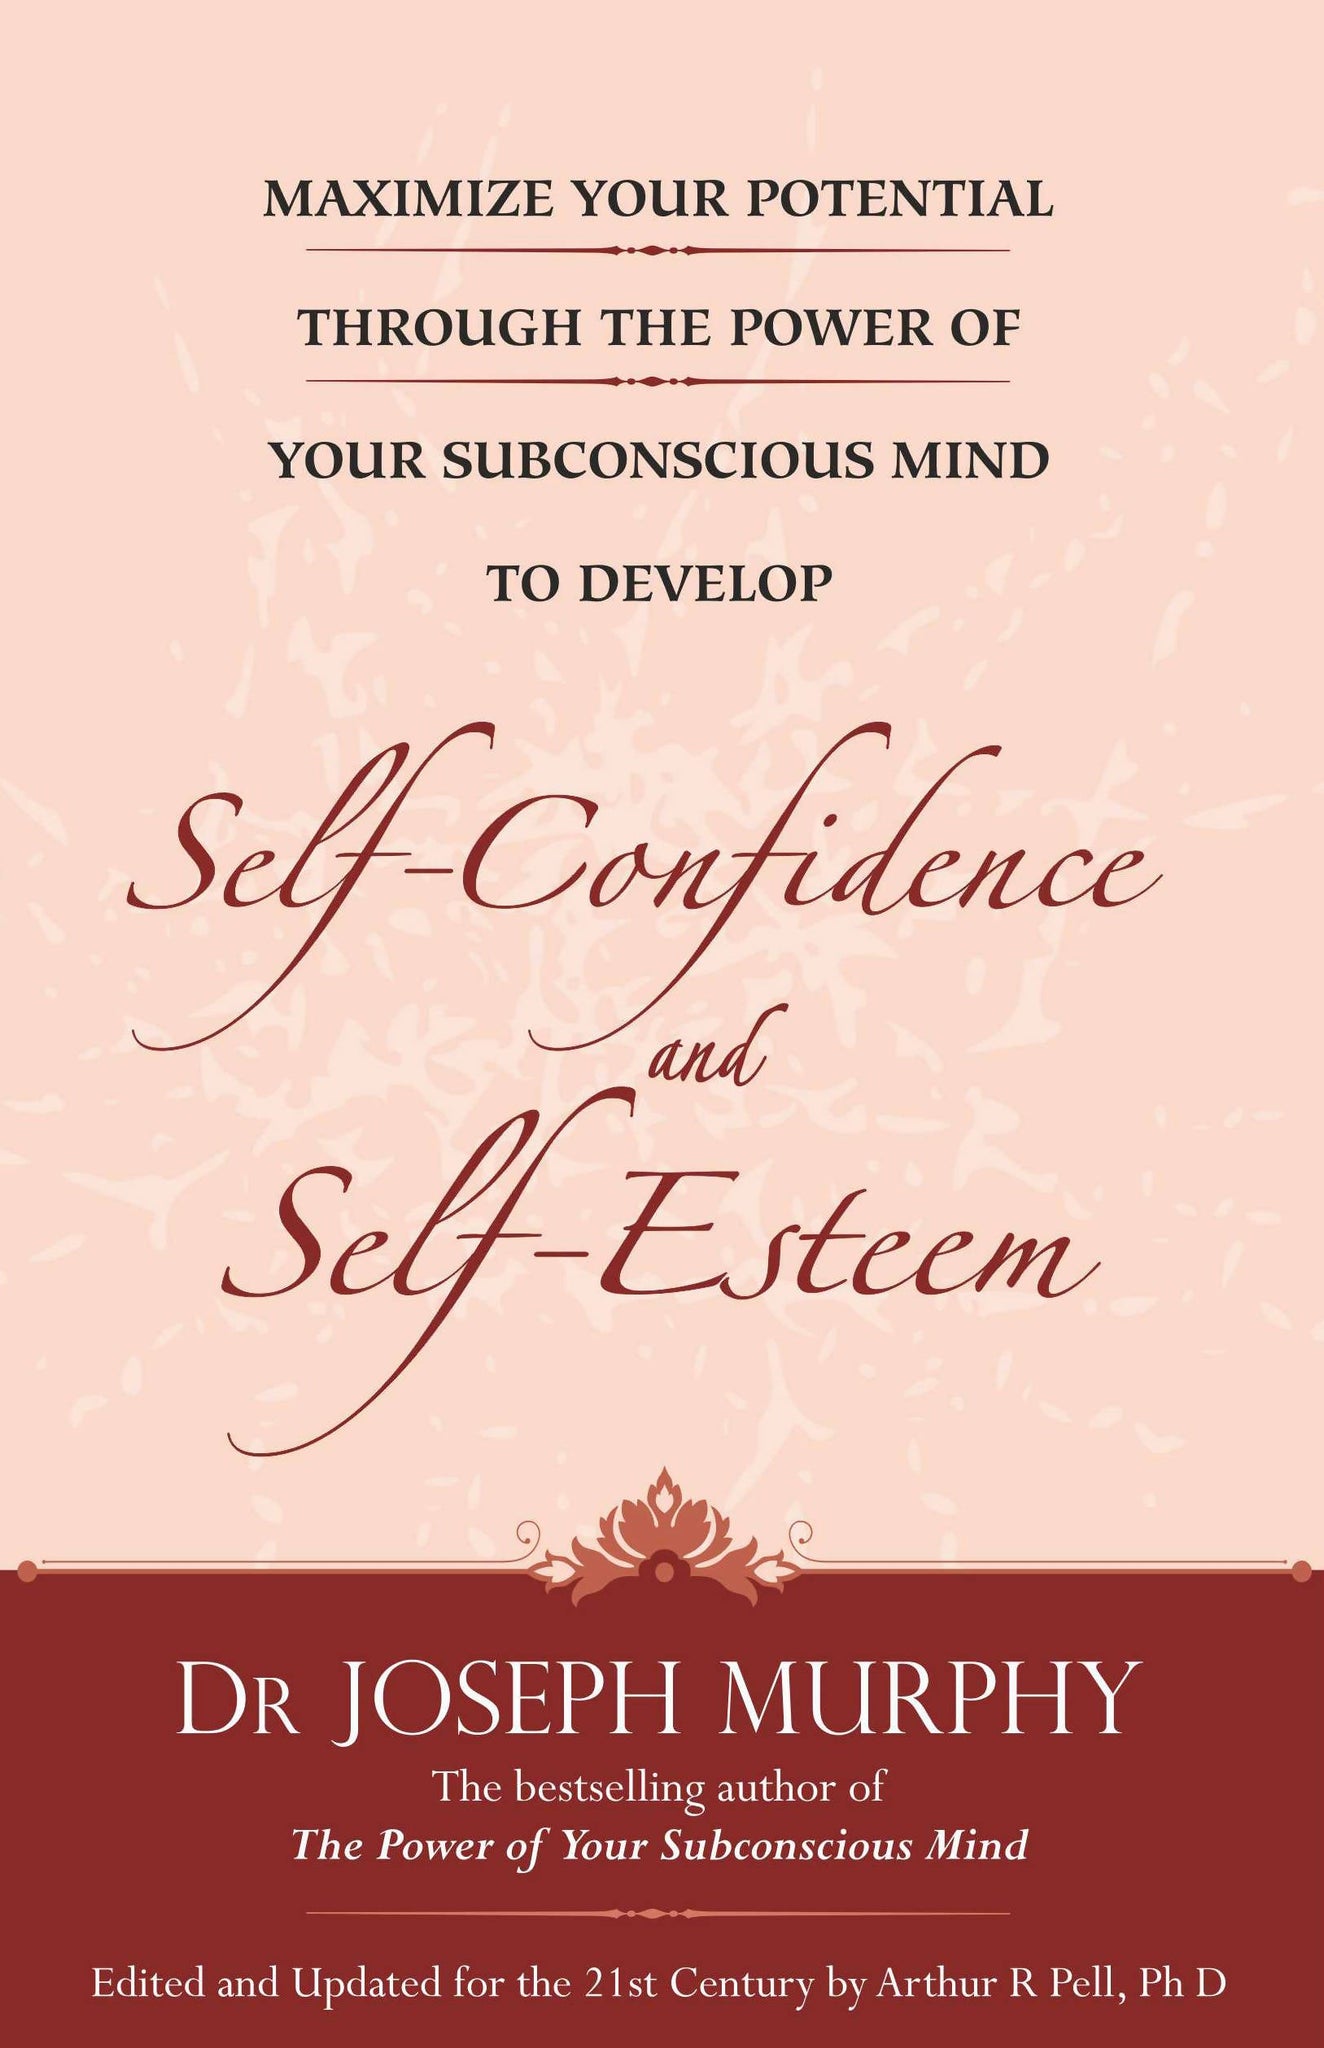 Maximize Your Potential -Self Confidence And Self-Esteem (English)